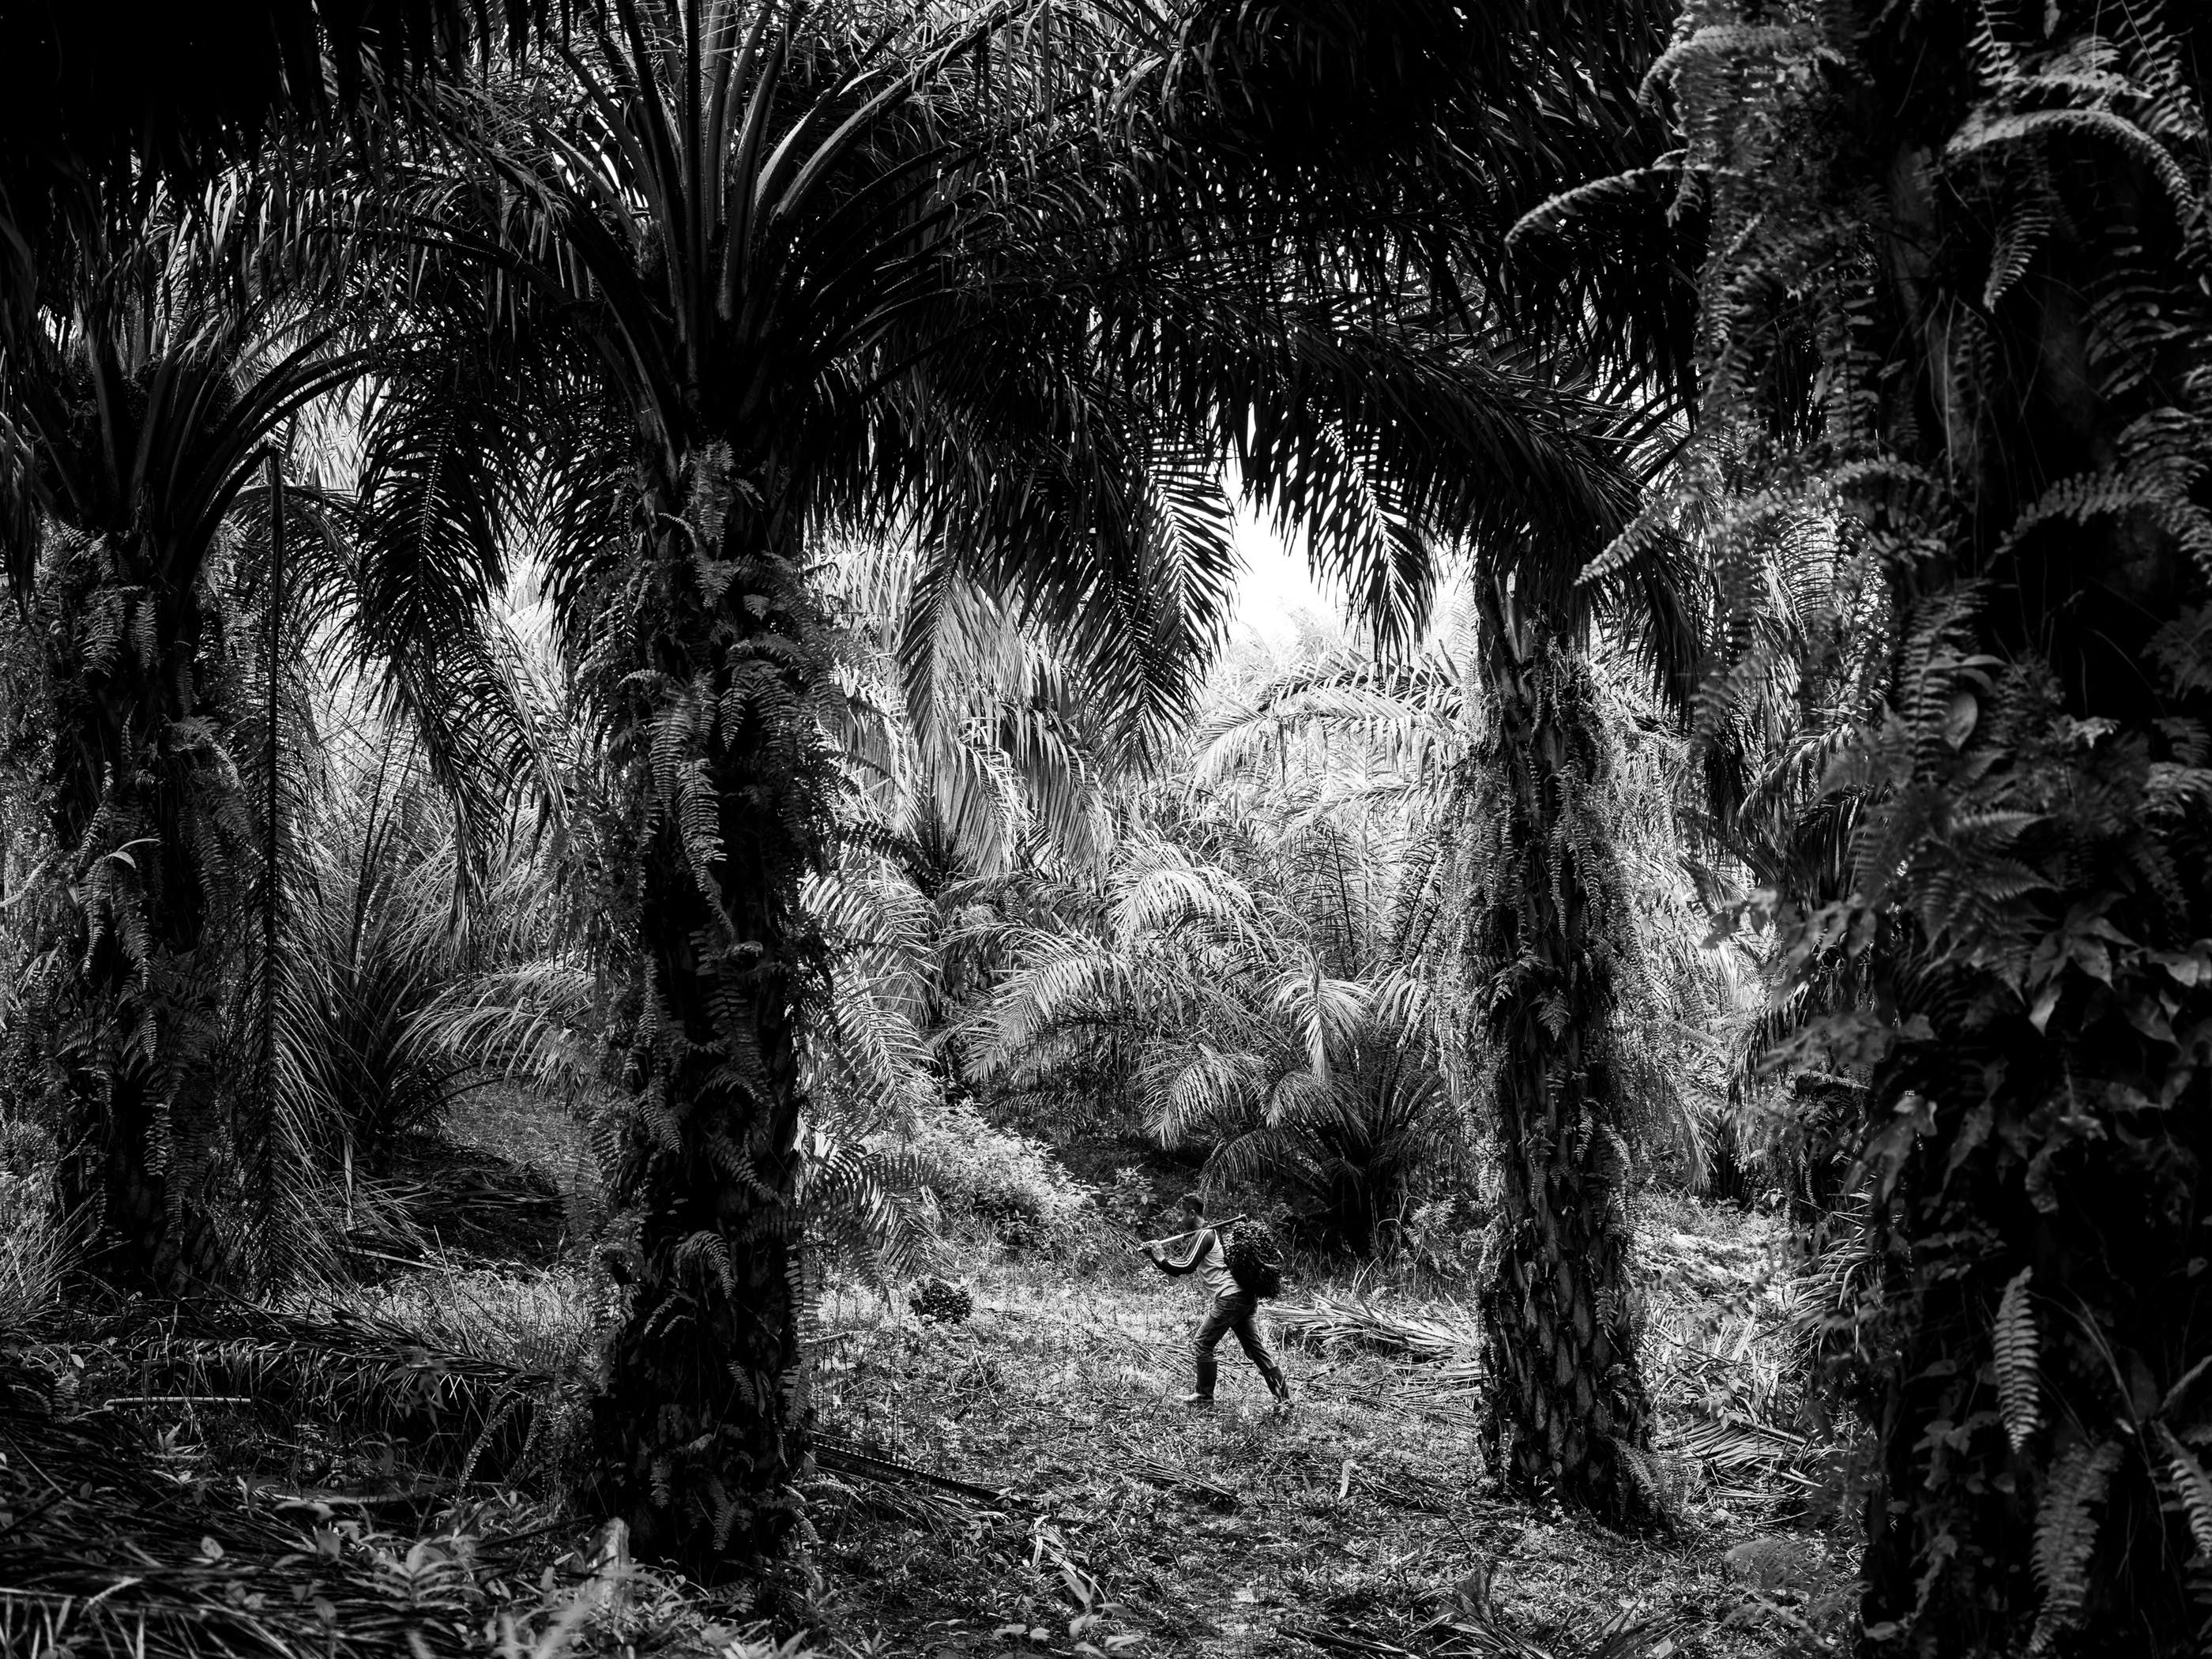 Palm oil is a billion-dollar industry that significantly contributes to the economy of Indonesia, which is a major global supplier and has plantations that stretch for millions of hectares. In this picture, farmer Puryito carries a palm fruit on a plantation in Kandis. Puryito’s whole family works on the plantations. Image by Xyza Cruz Bacani. Indonesia, 2018.